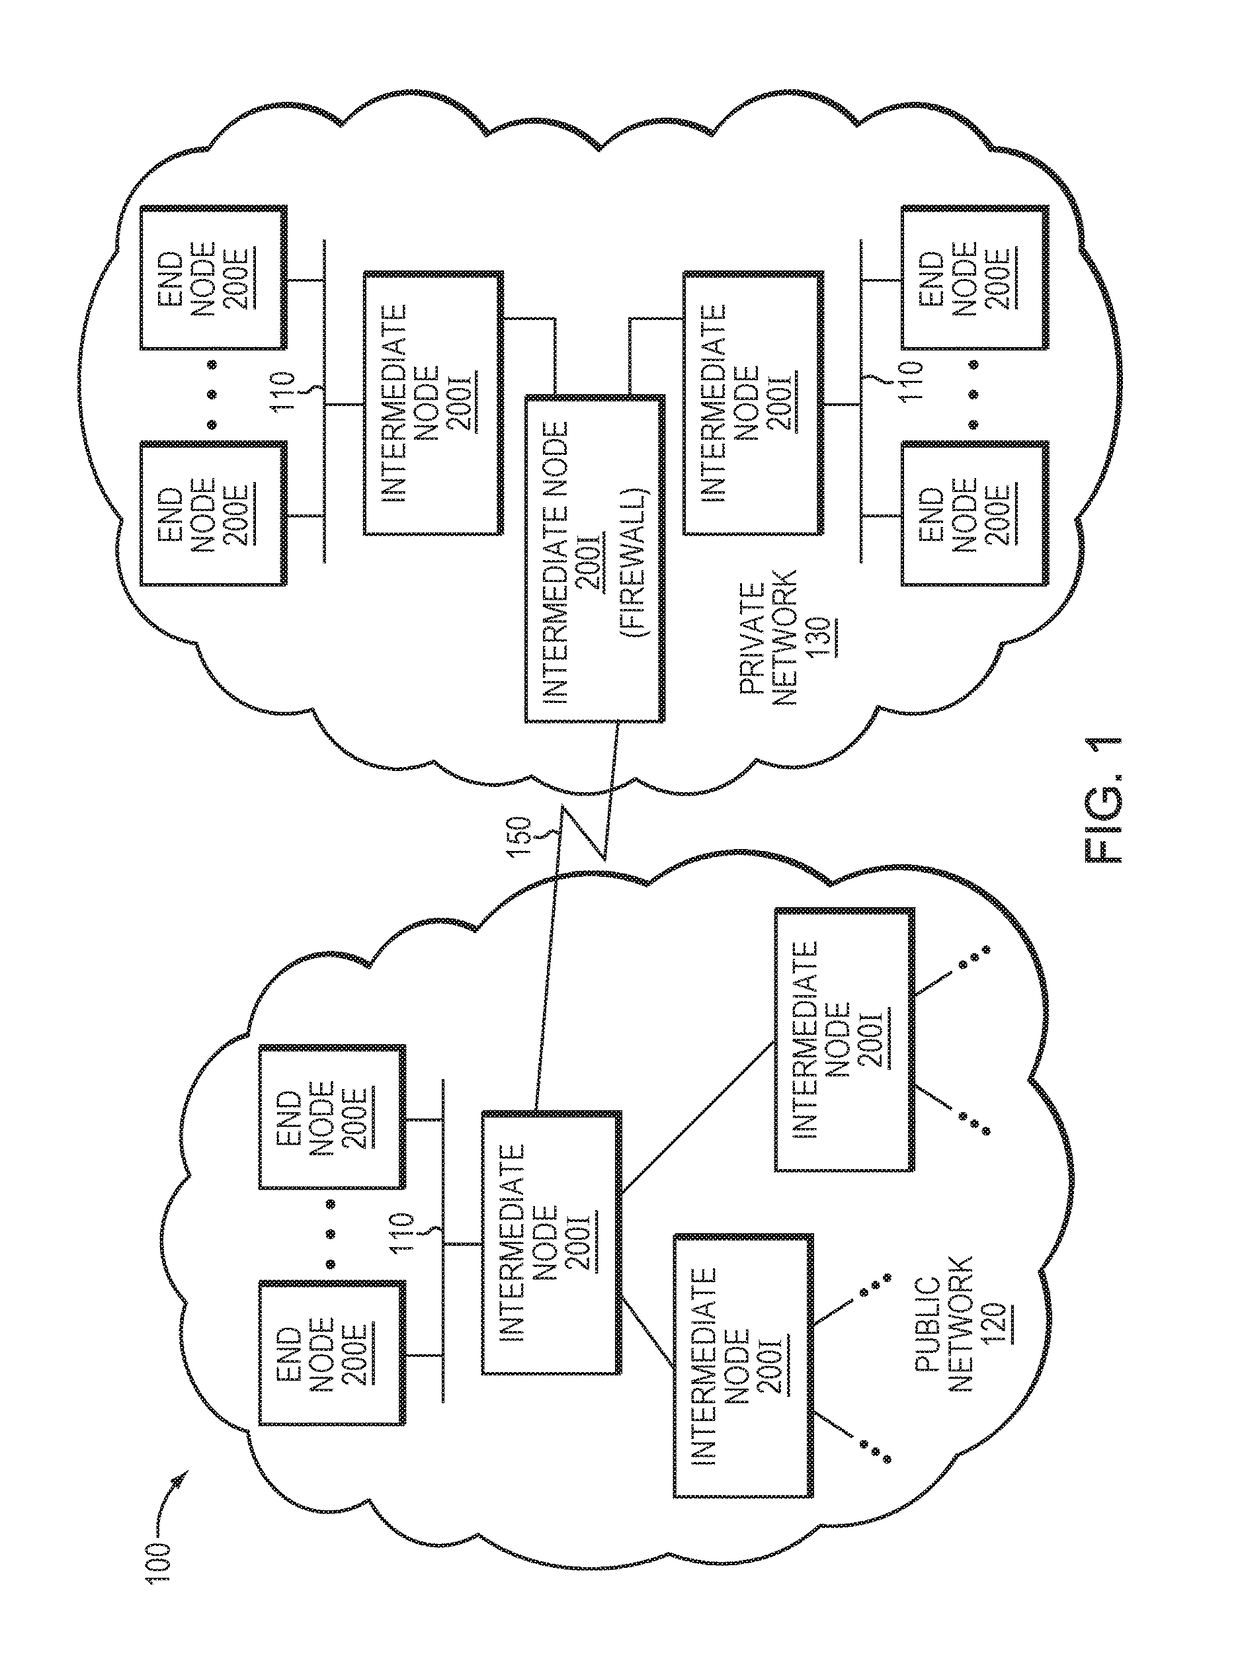 Verification of complex software code using a modularized architecture